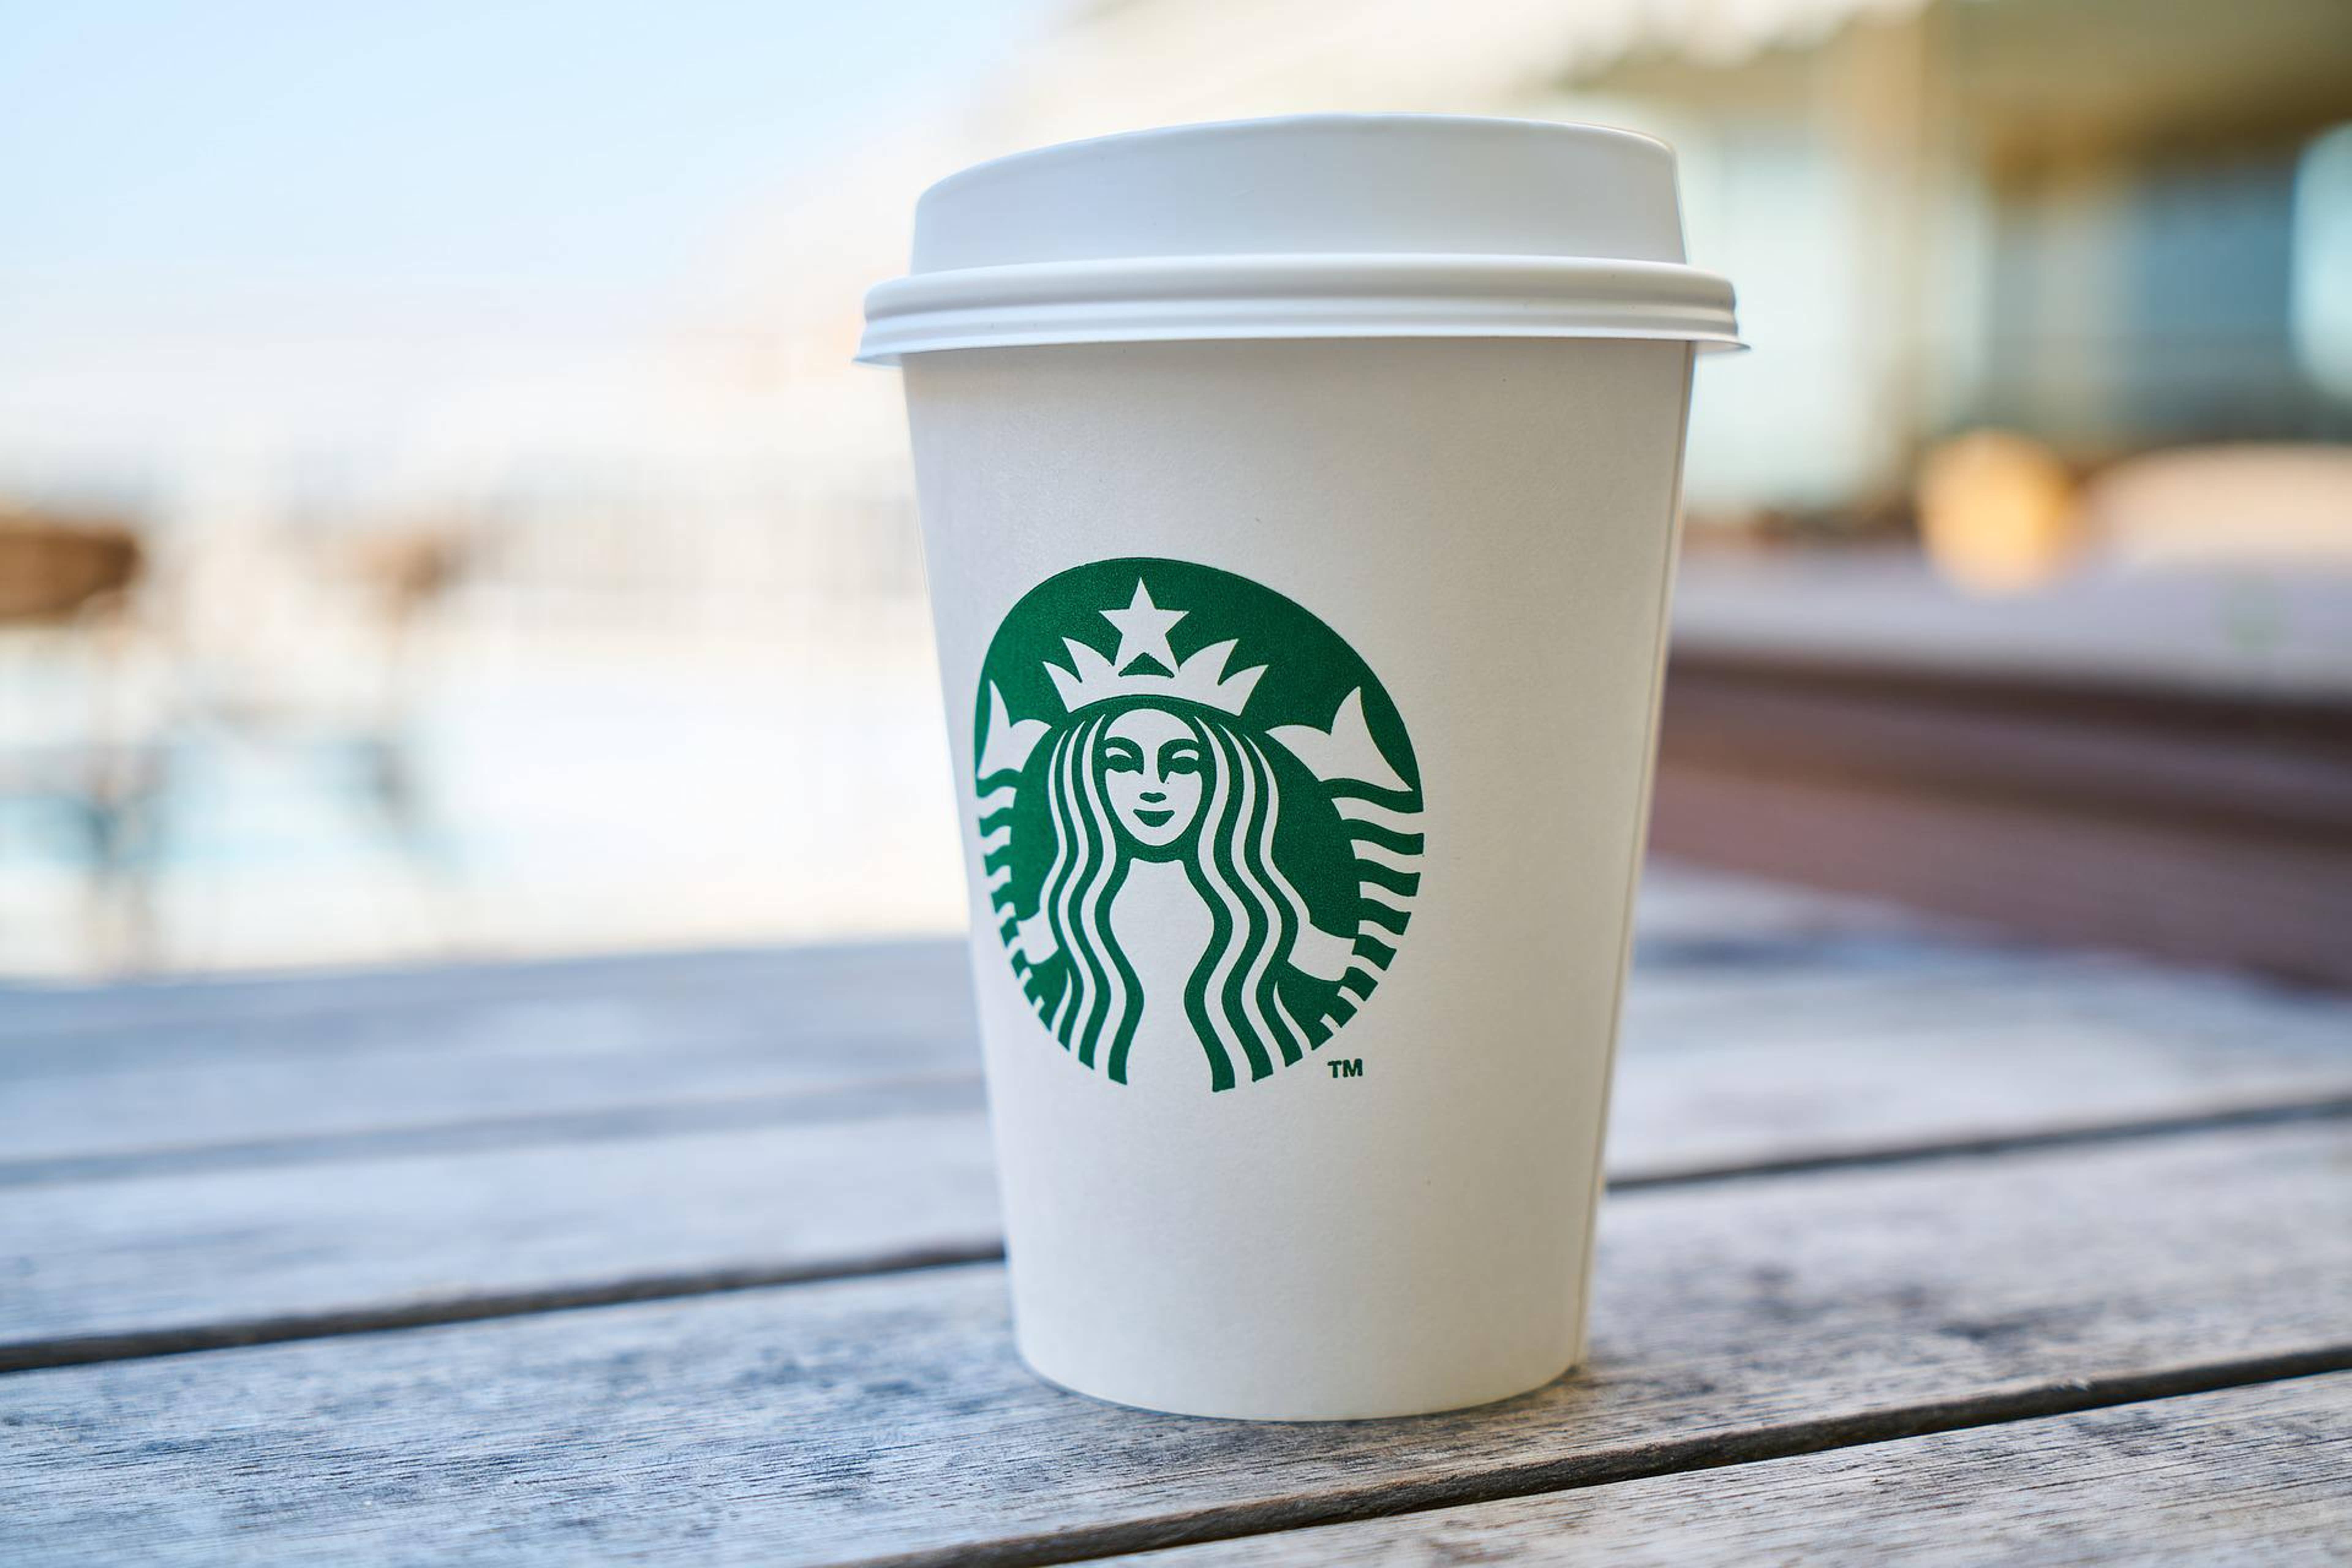 Why This Starbucks Investor Continues To Buy Stock